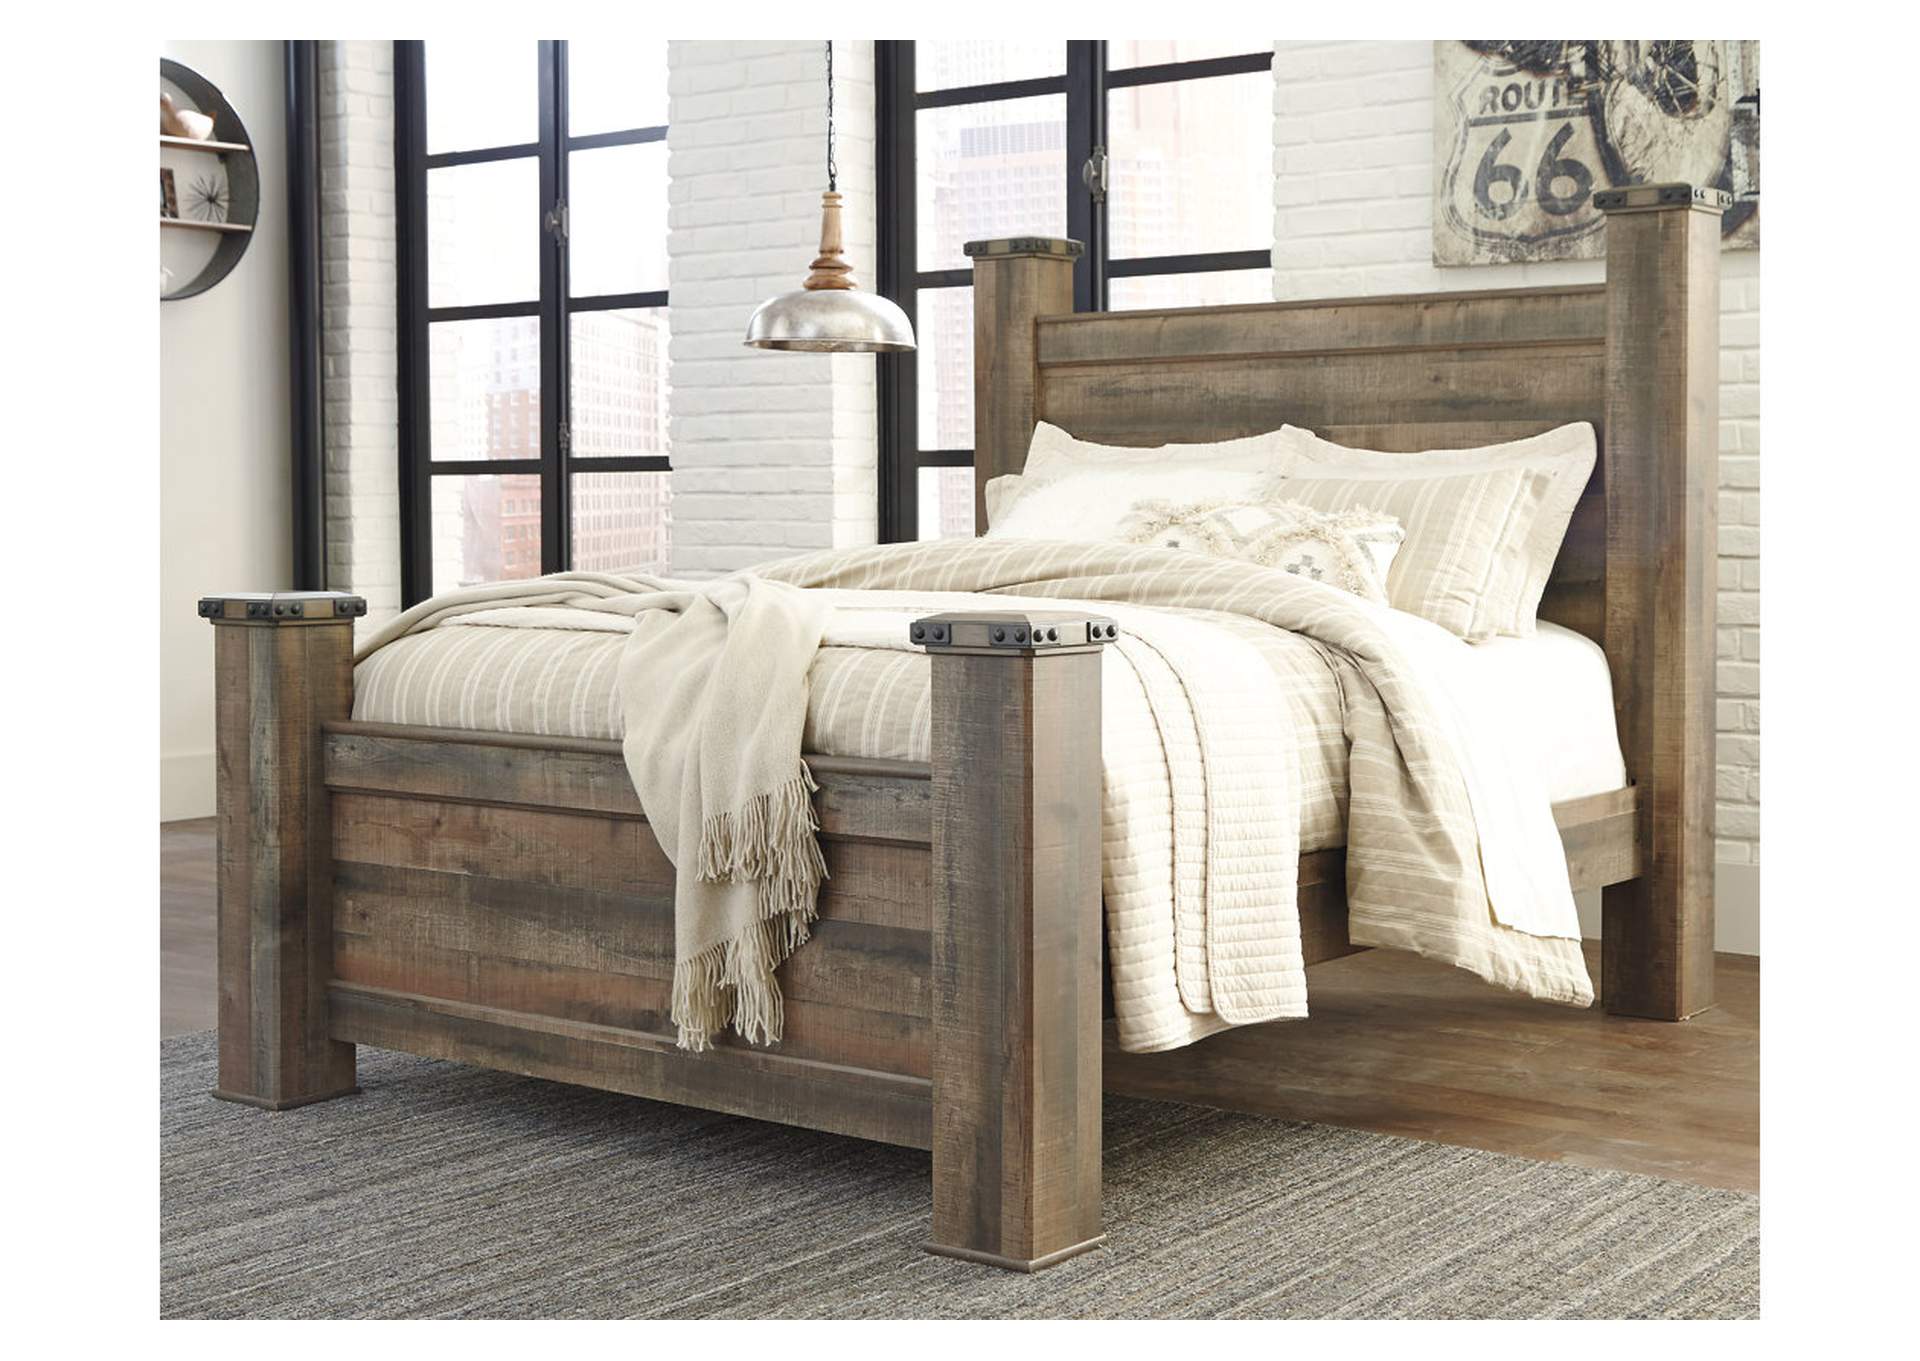 Trinell Queen Poster Bed, Dresser, Mirror and Nightstand,Signature Design By Ashley